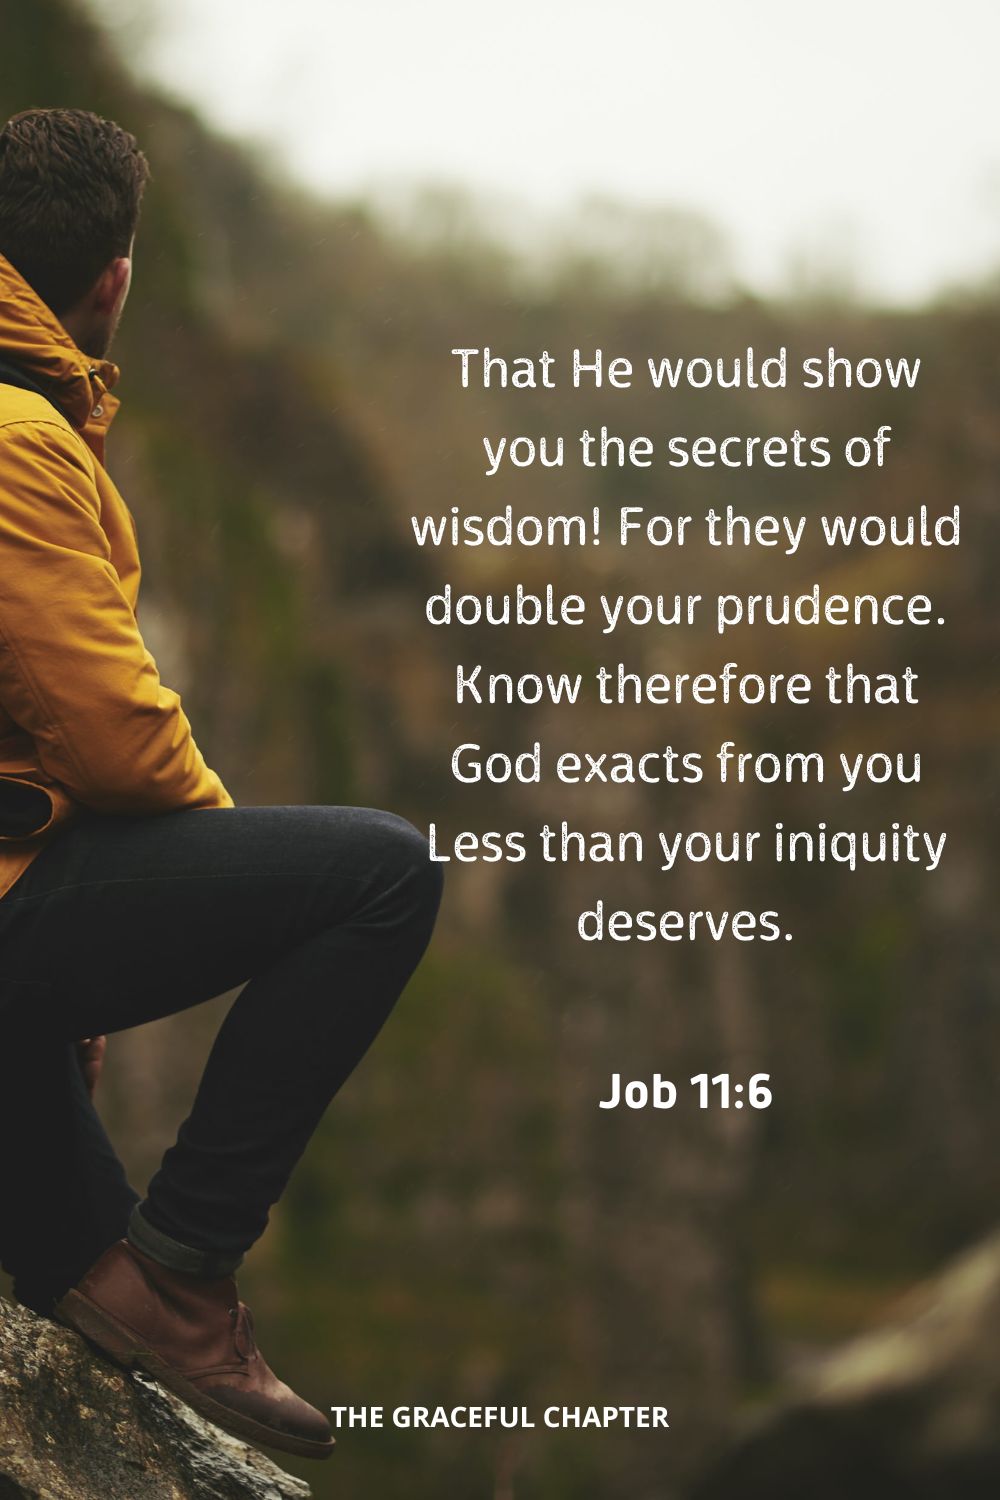 That He would show you the secrets of wisdom! For they would double your prudence. Know therefore that God exacts from you Less than your iniquity deserves.